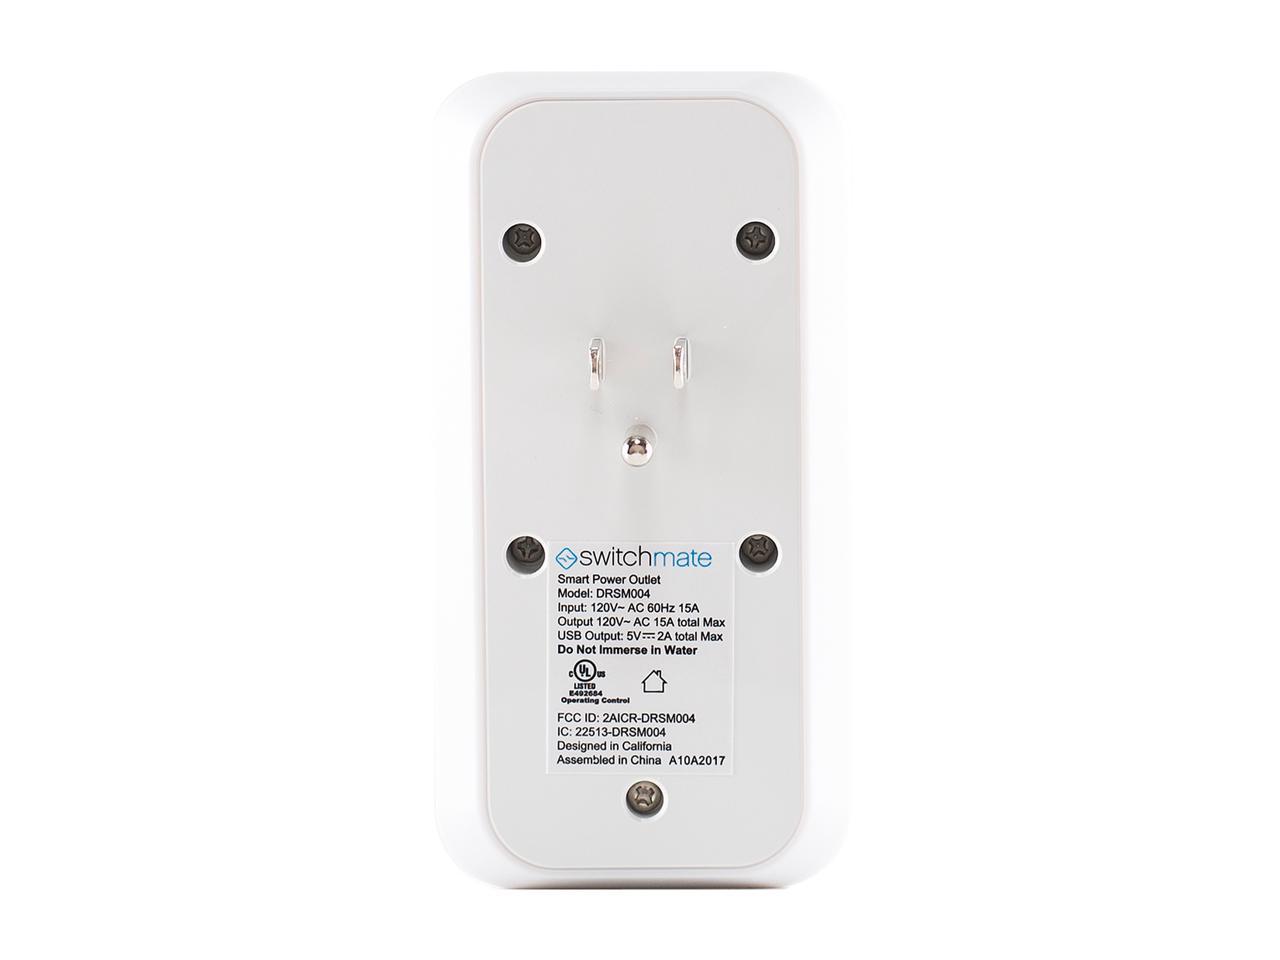 dual-smart-power-outlet-drsm004-new-white-5